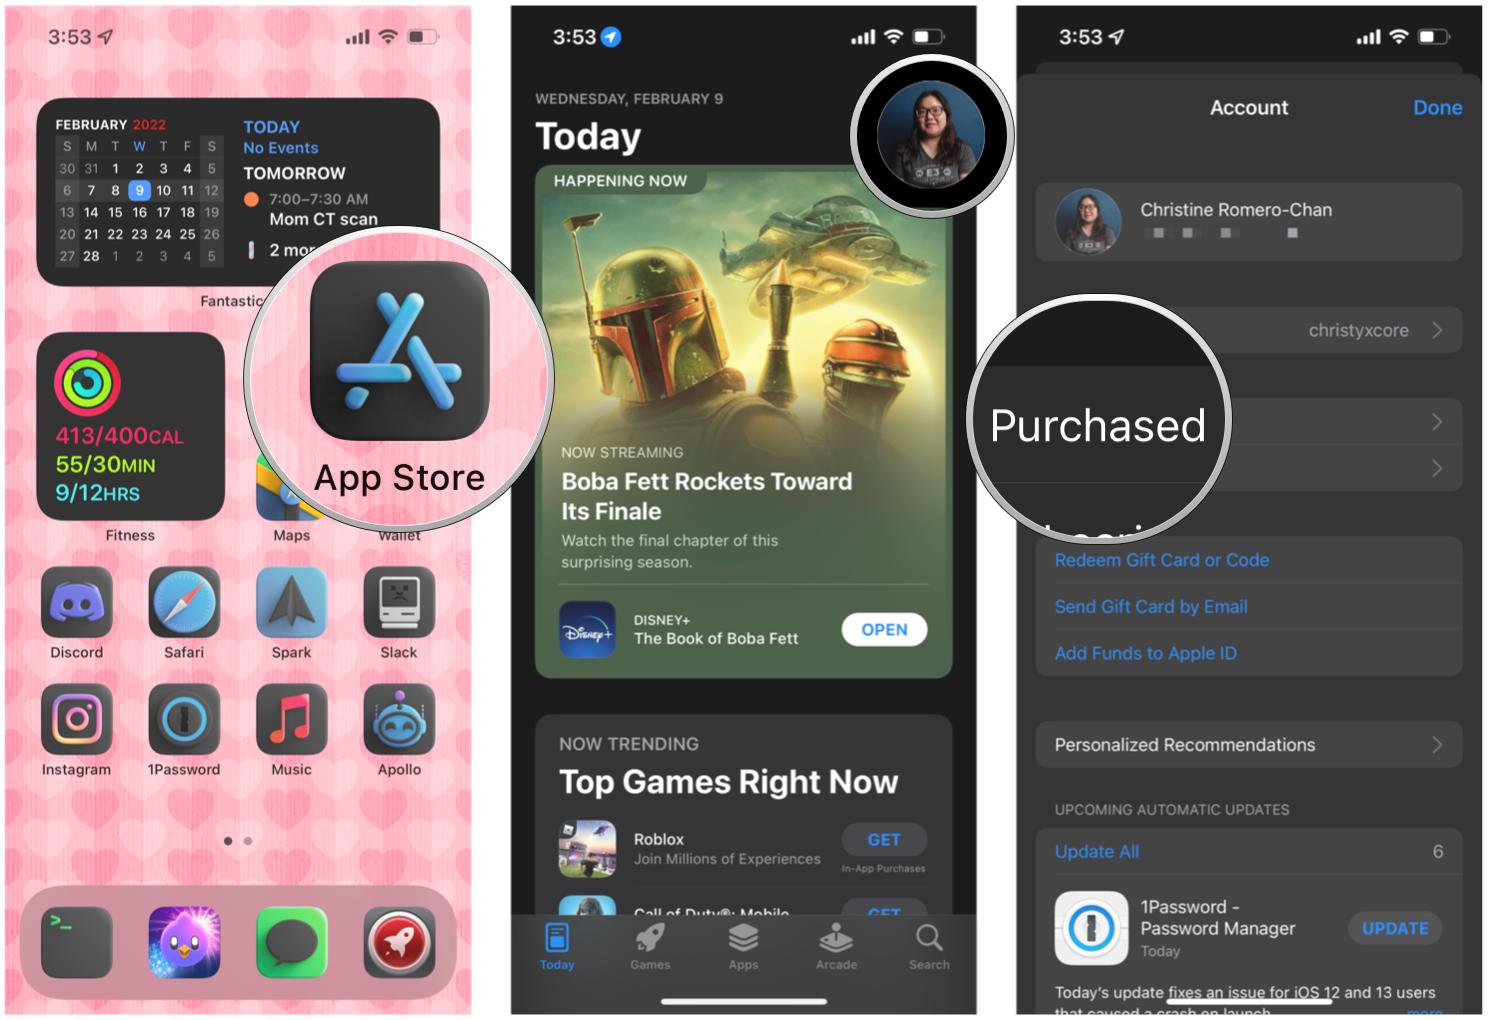 Hide apps from purchase history on App Store on iPhone by showing: Launch App Store, tap Apple ID, tap Purchased